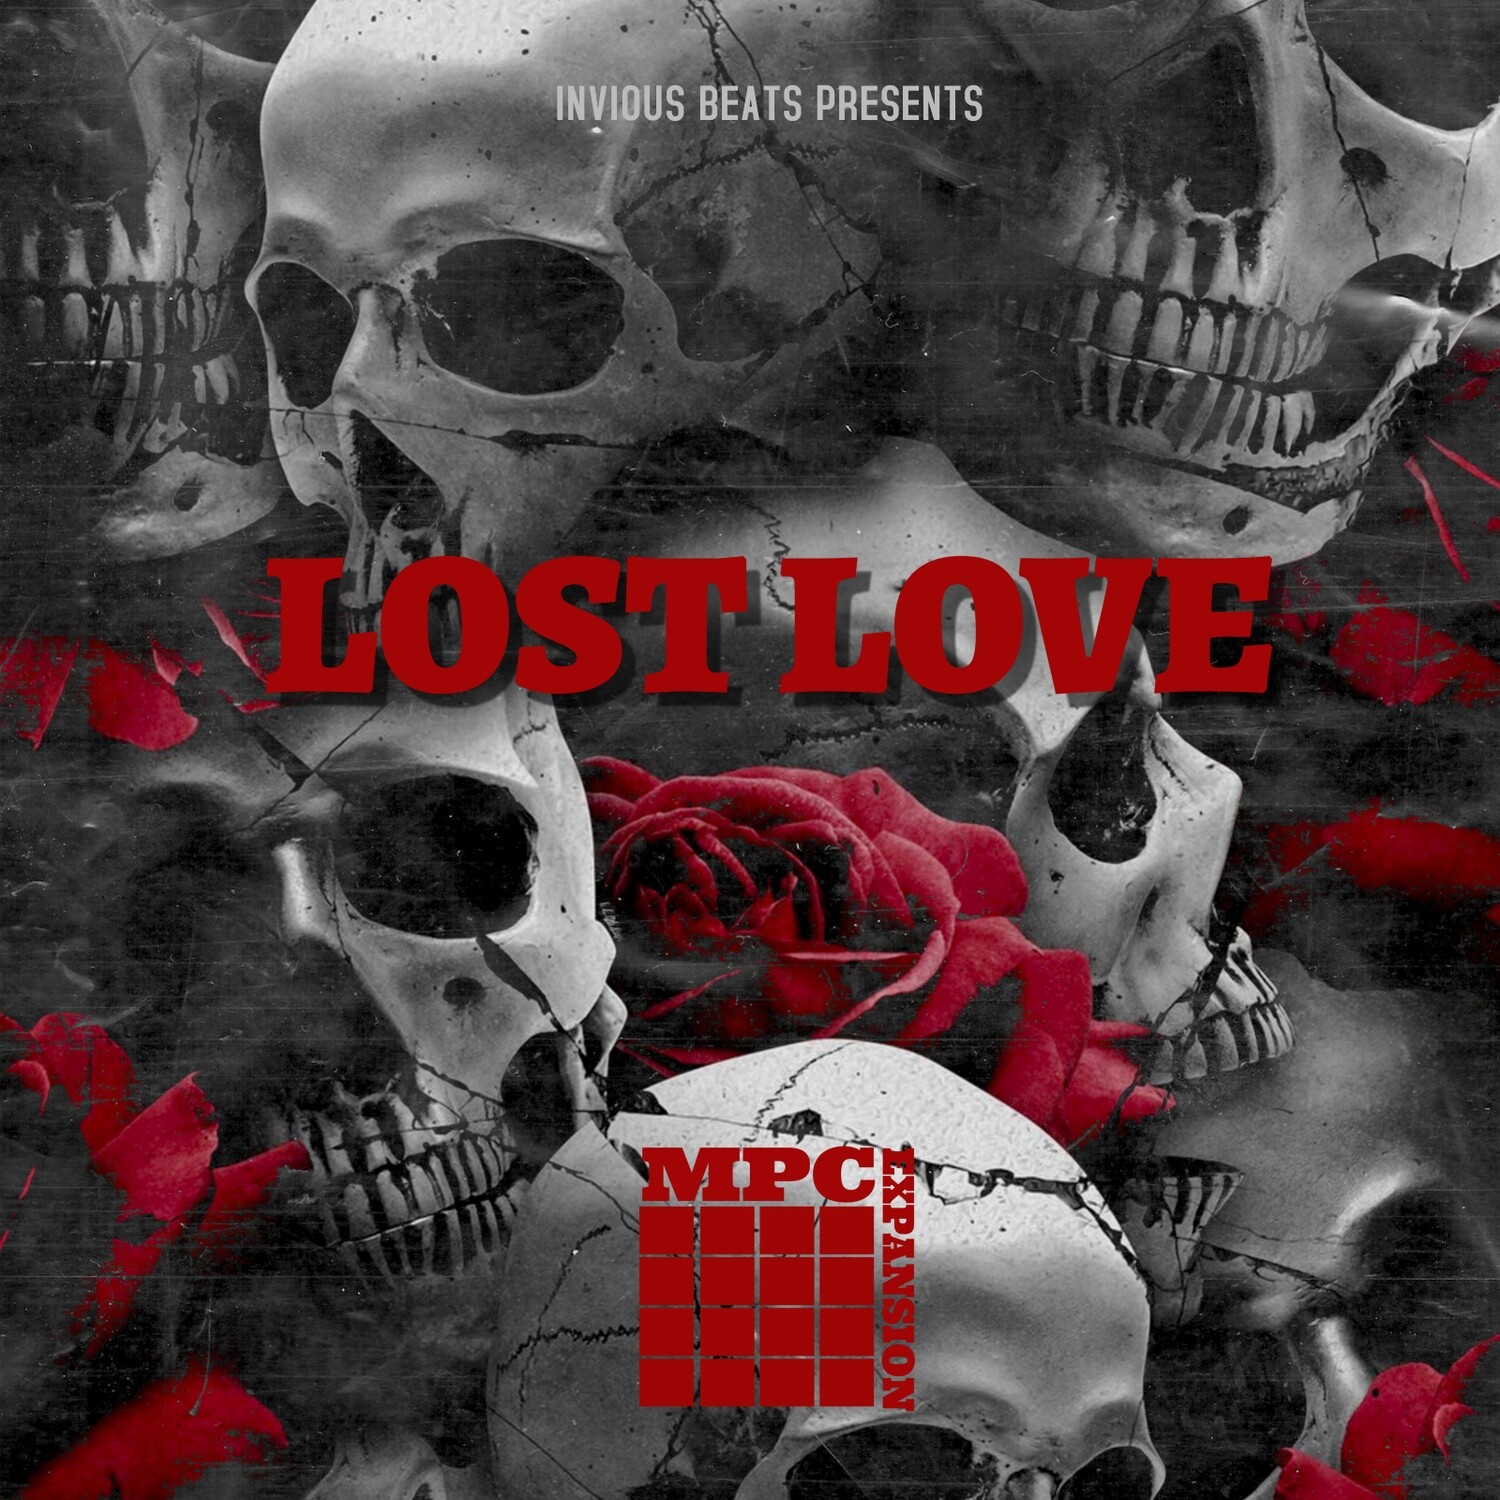 MPC EXPANSION "LOST LOVE" by INVIOUS